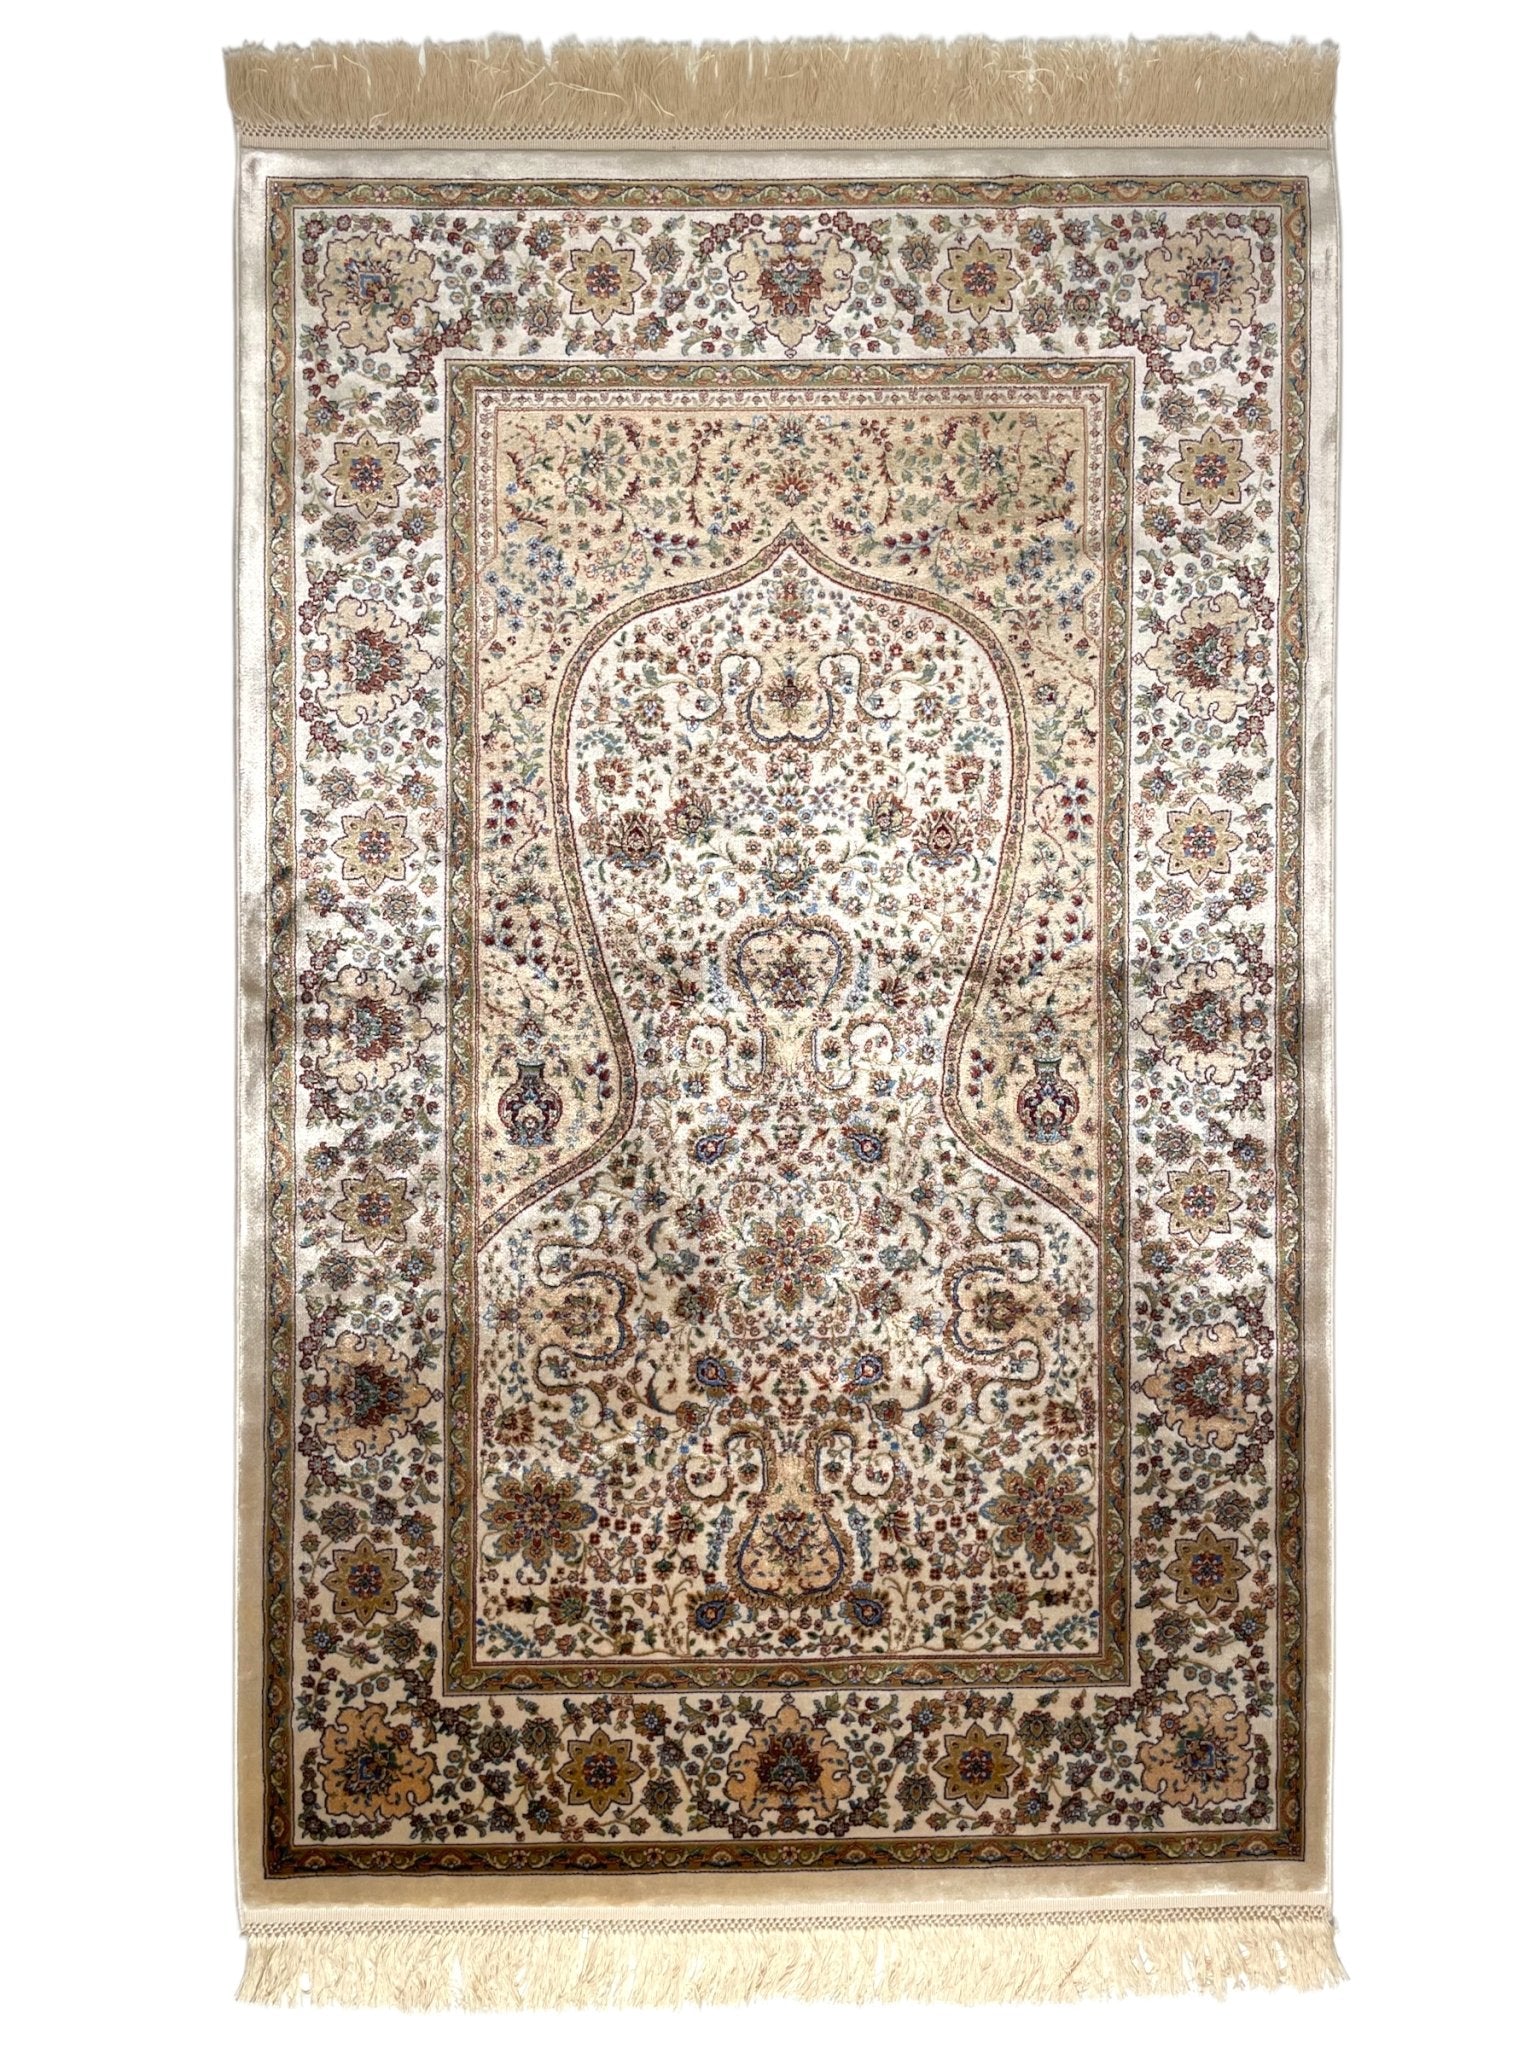 HIMMA Modal Prayer Rug in Beige by Asrār Collection